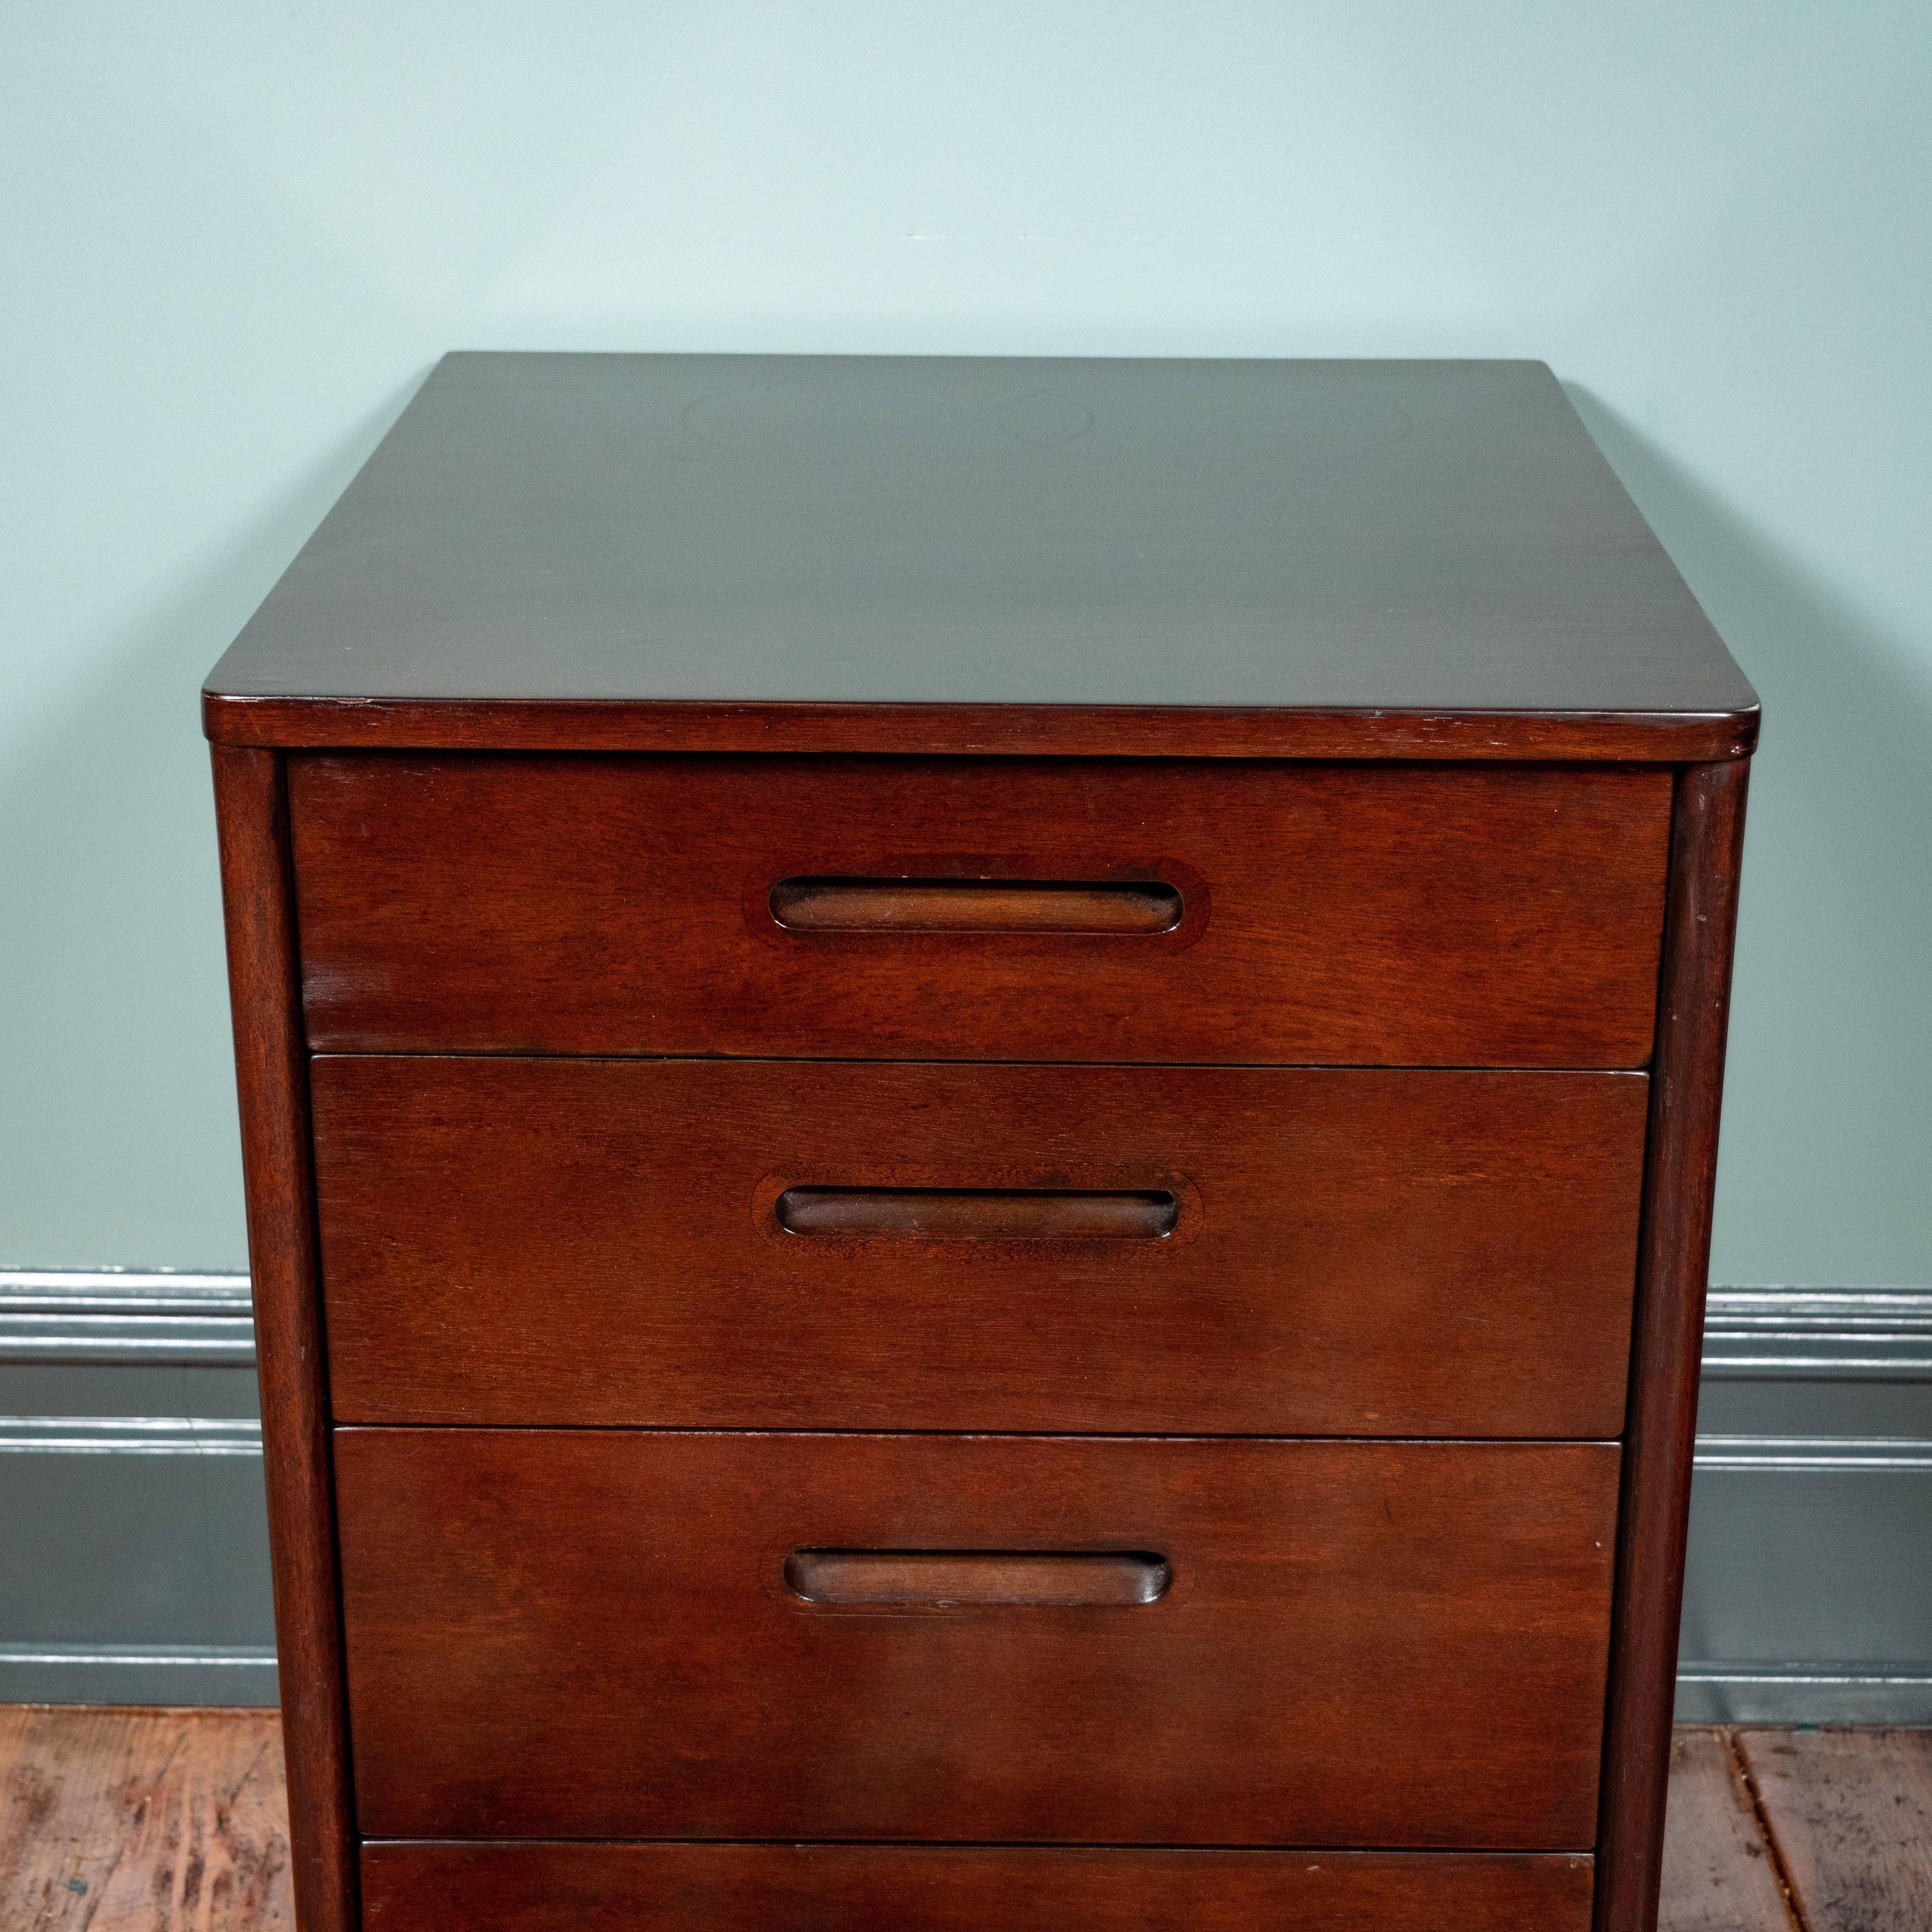 Pair of Edward Wormley for Dunbar nightstands or small chest of drawers. Manufactured by Dunbar.

 